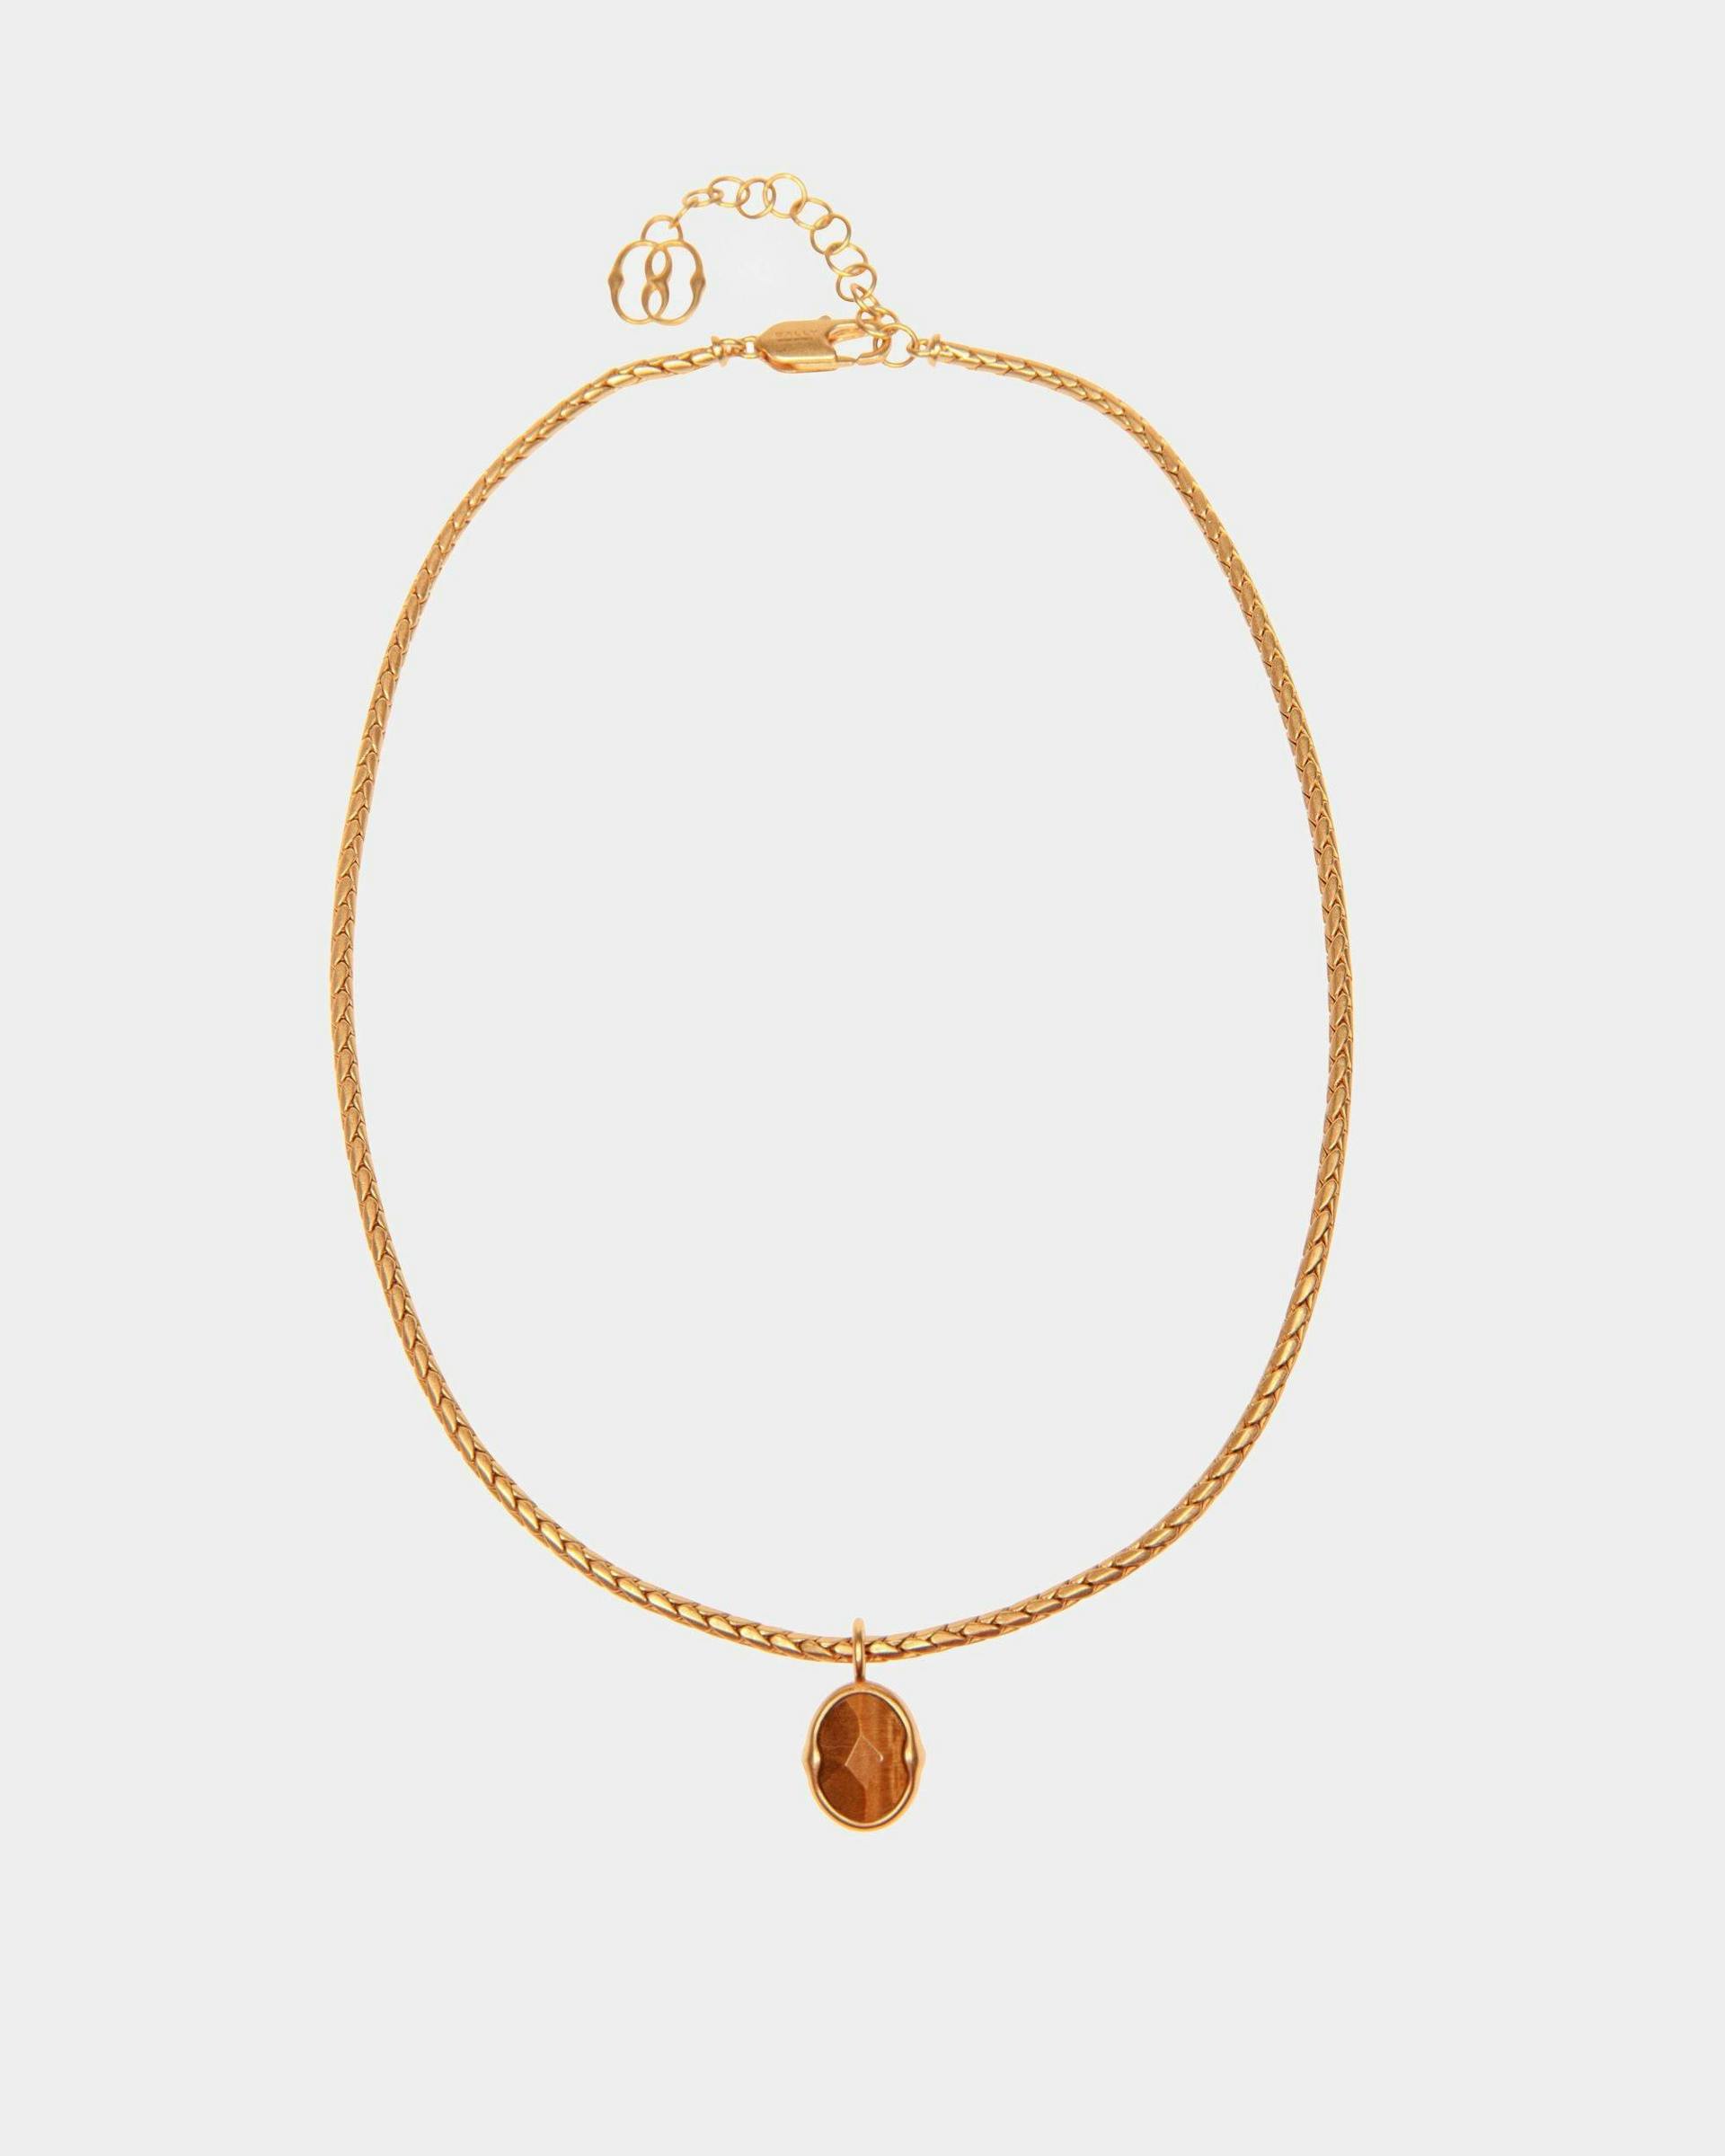 Frame Outline Necklace With A Snake Chain - Women's - Bally - 01